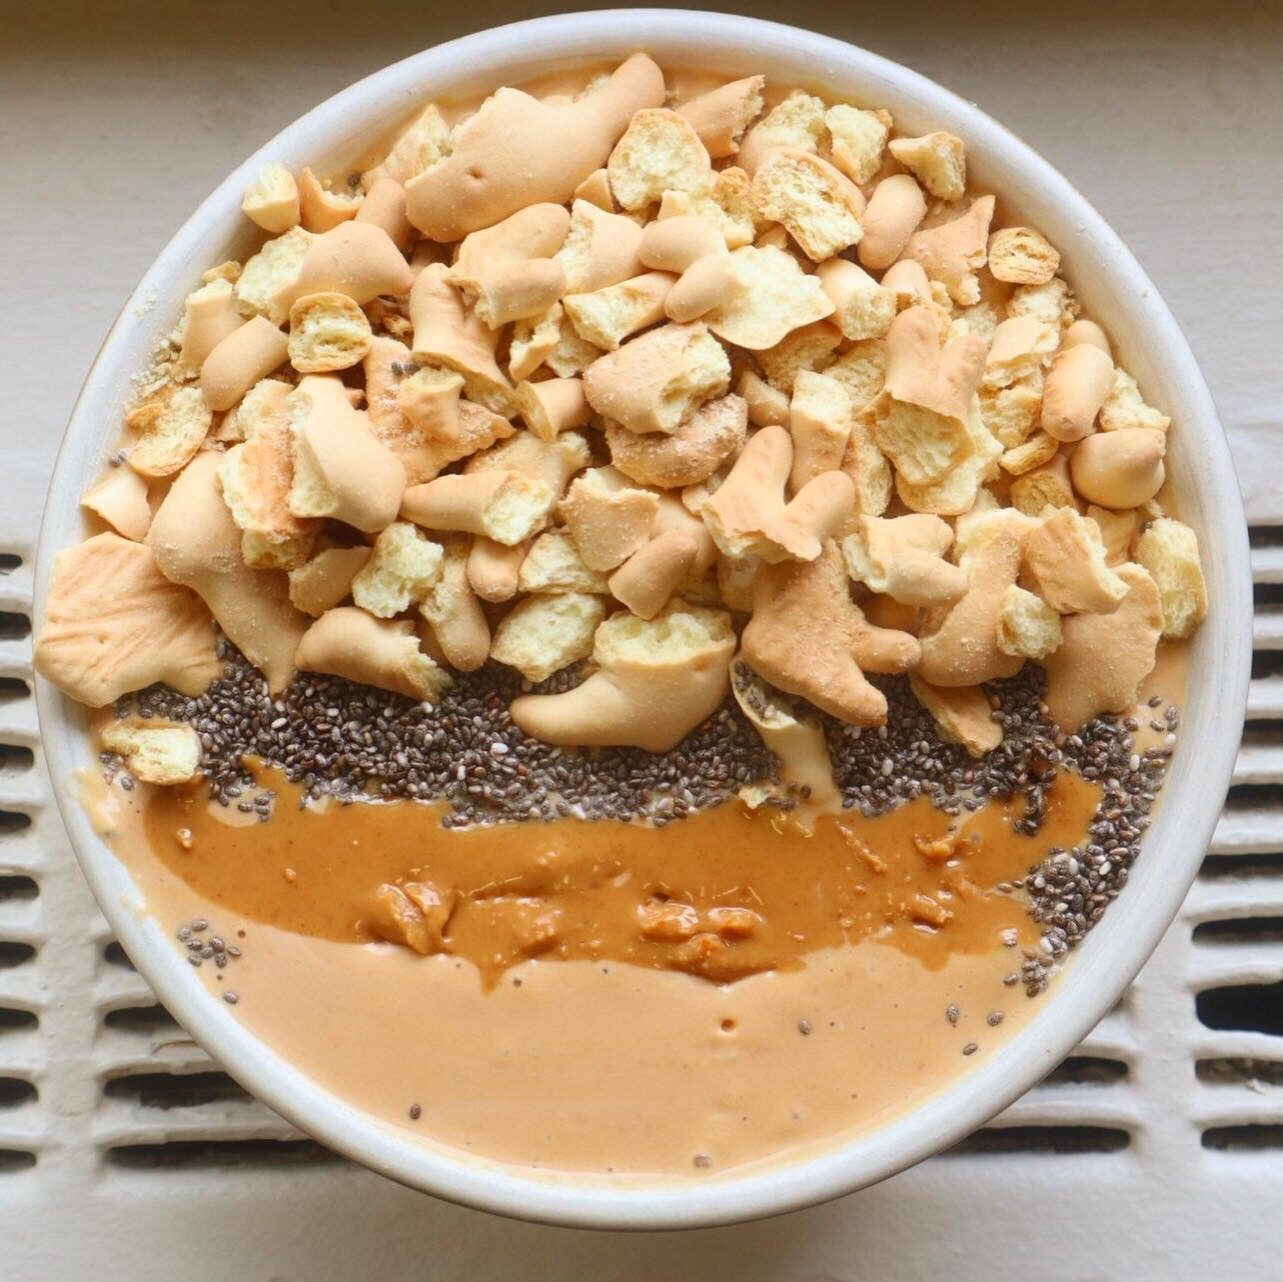 Smoothie bowl topped with crushed animal crackers